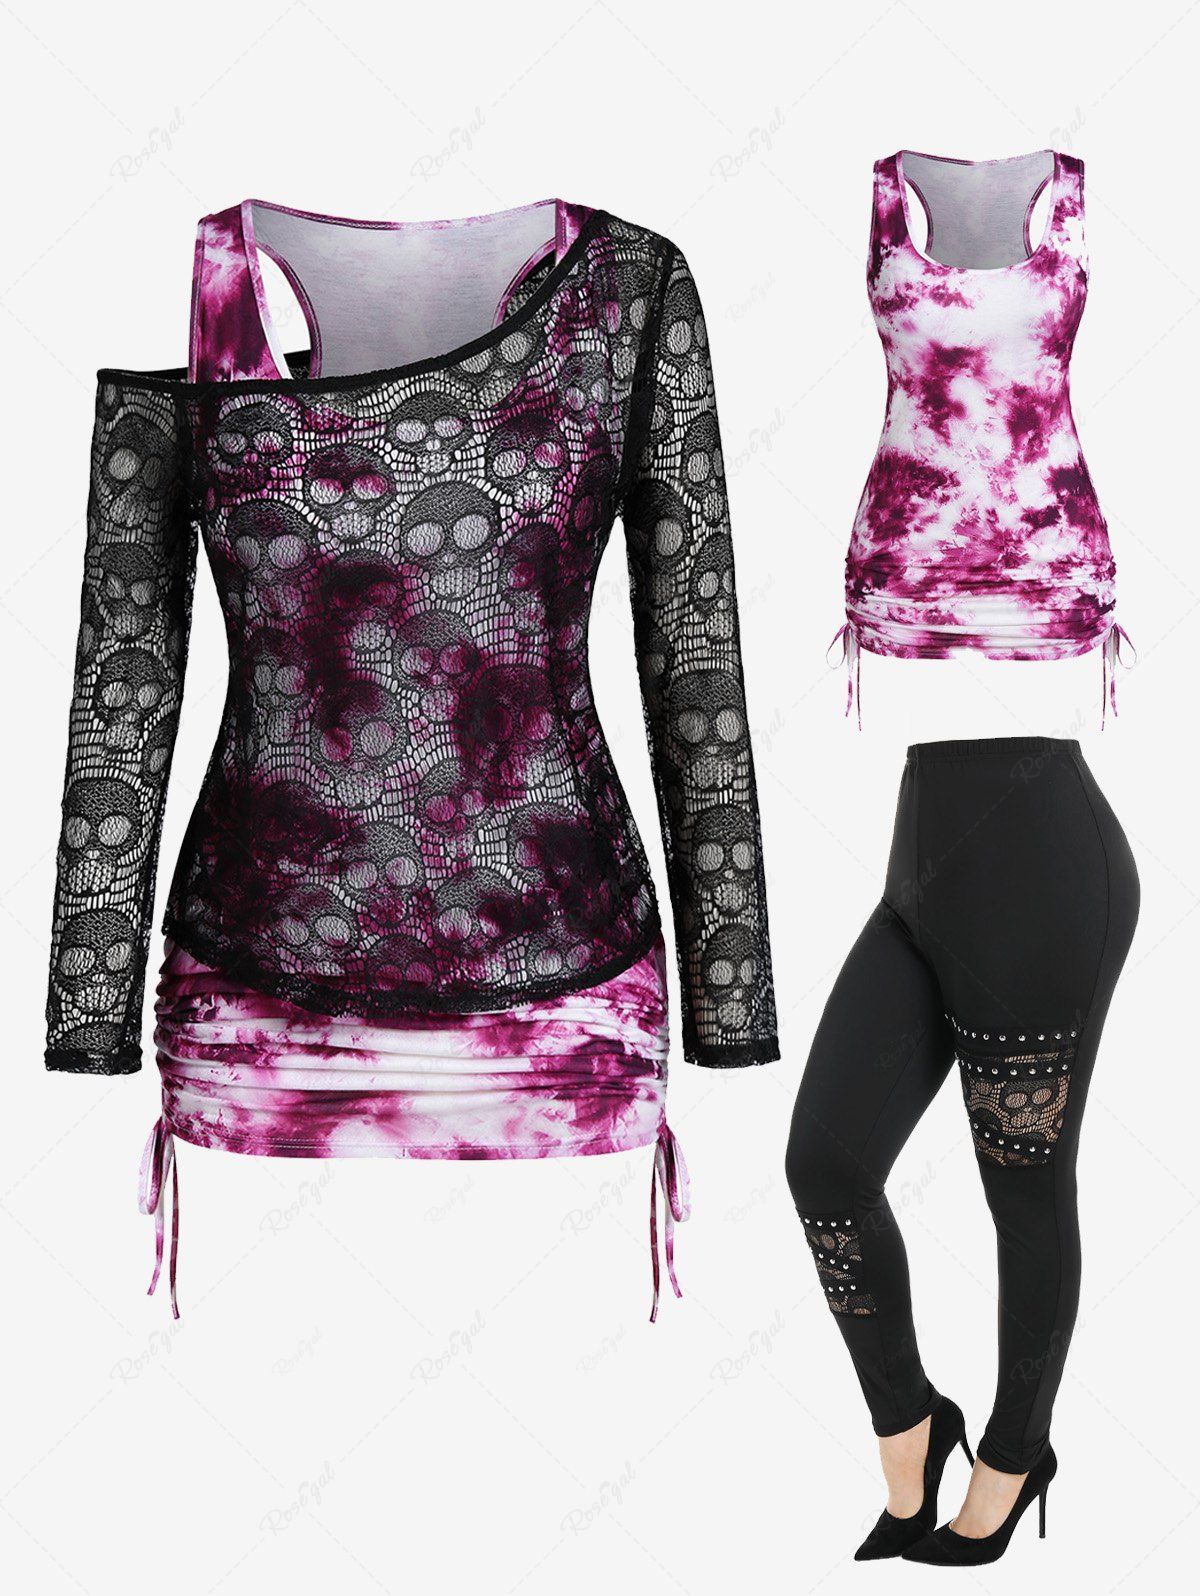 Sale Gothic Skull Lace Tee and Cinched Tie Dye Tank Top Set and Lace Panel Studded Pants Outfit  